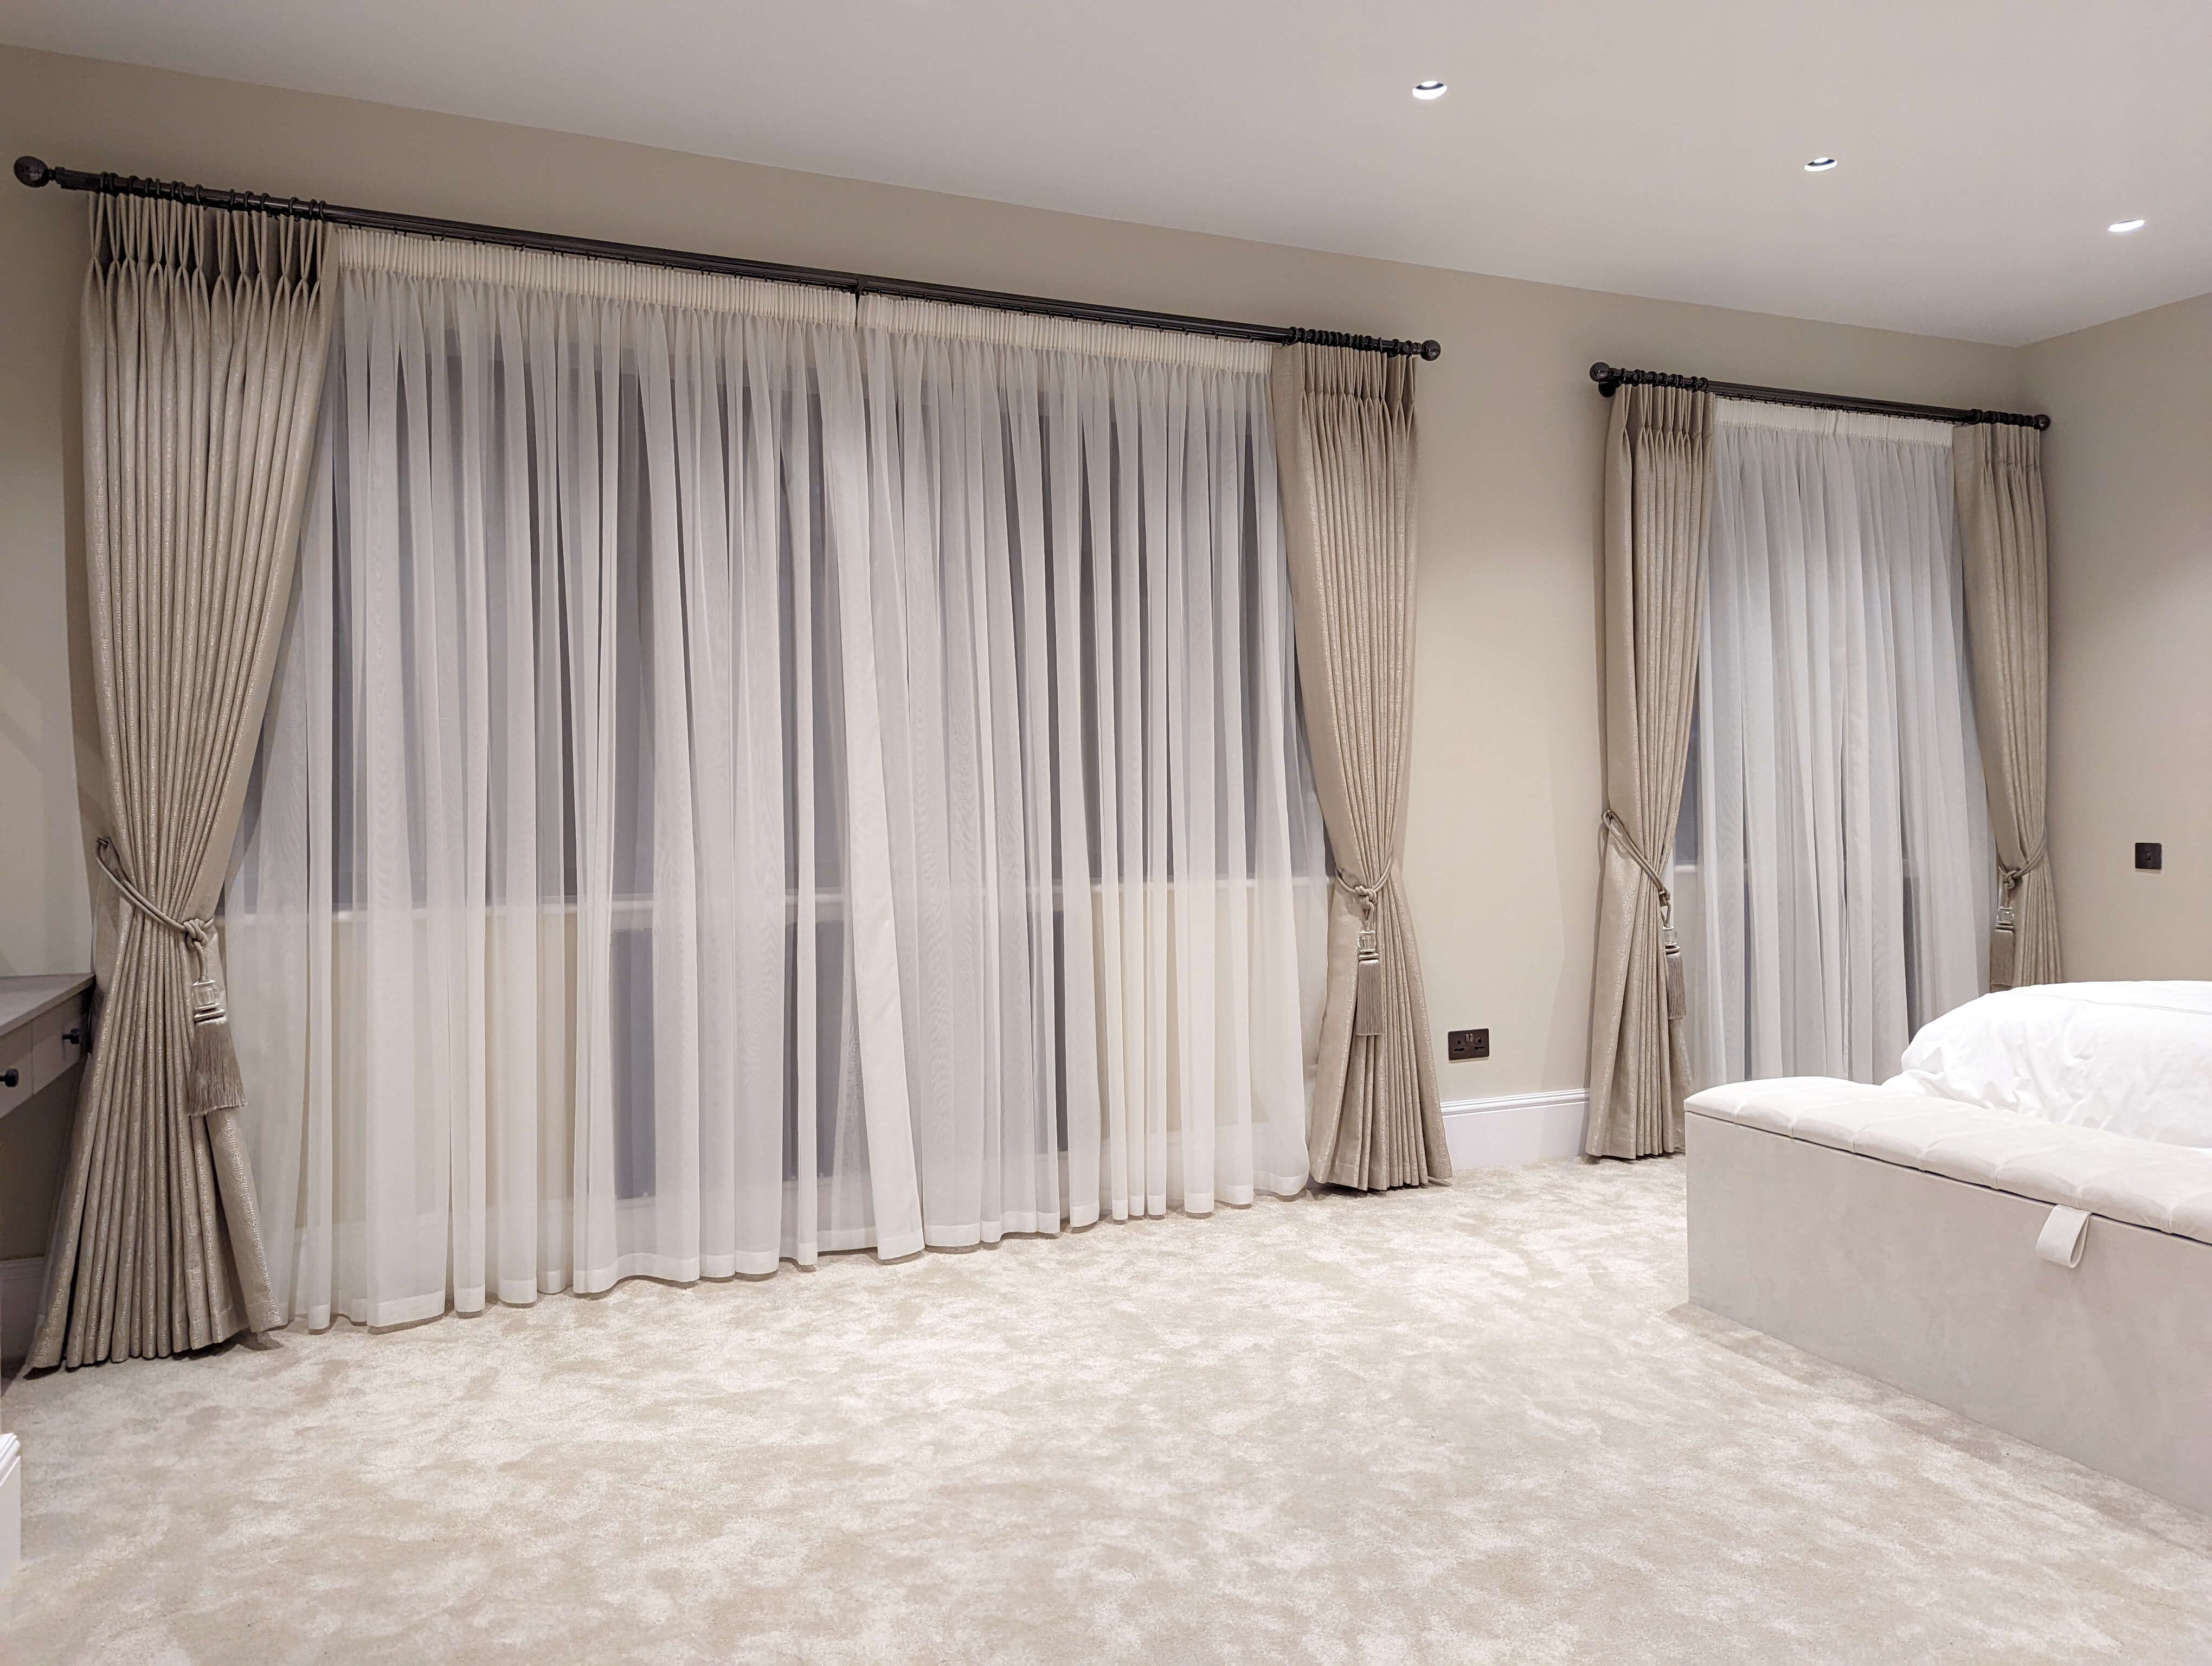 Bedroom Curtains with Dark Poles and Pencil Pleated Sheers